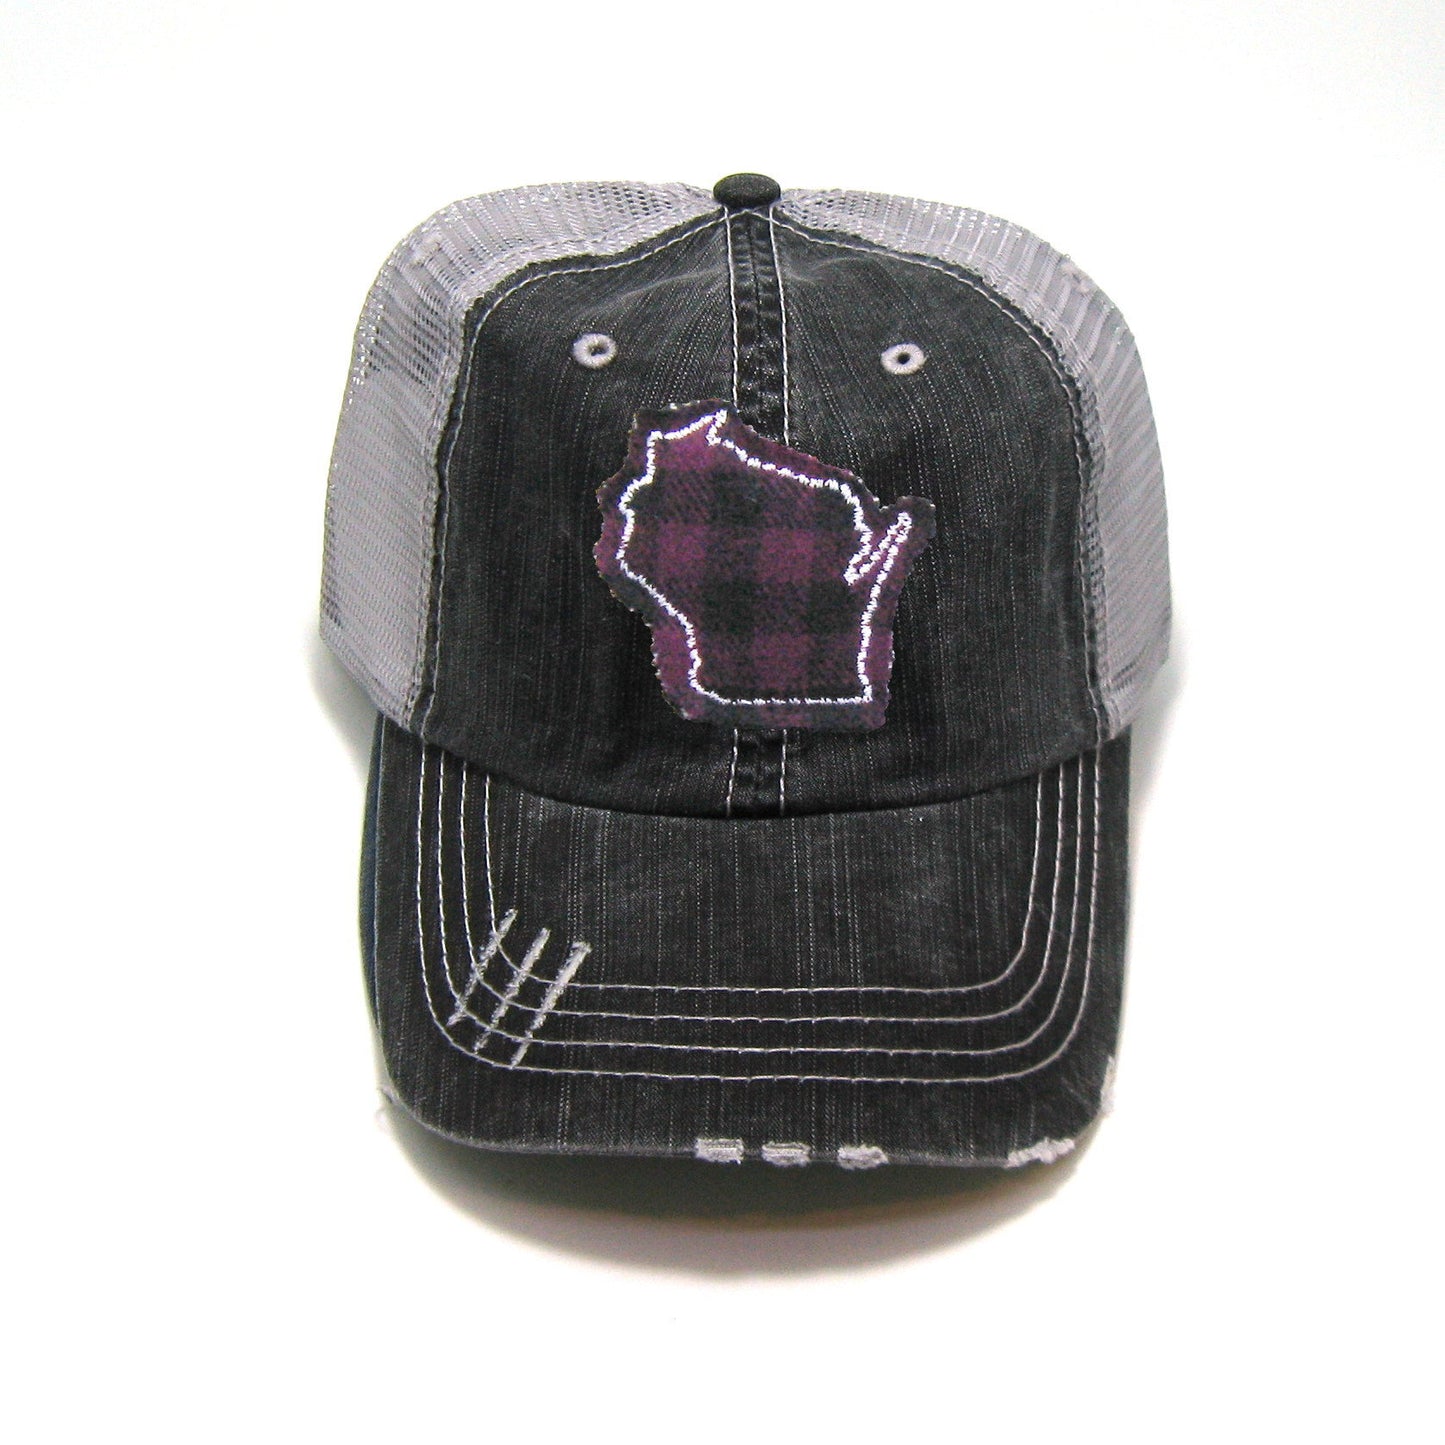 Gray Distressed Trucker Hat - Plum Buffalo Check - All US States